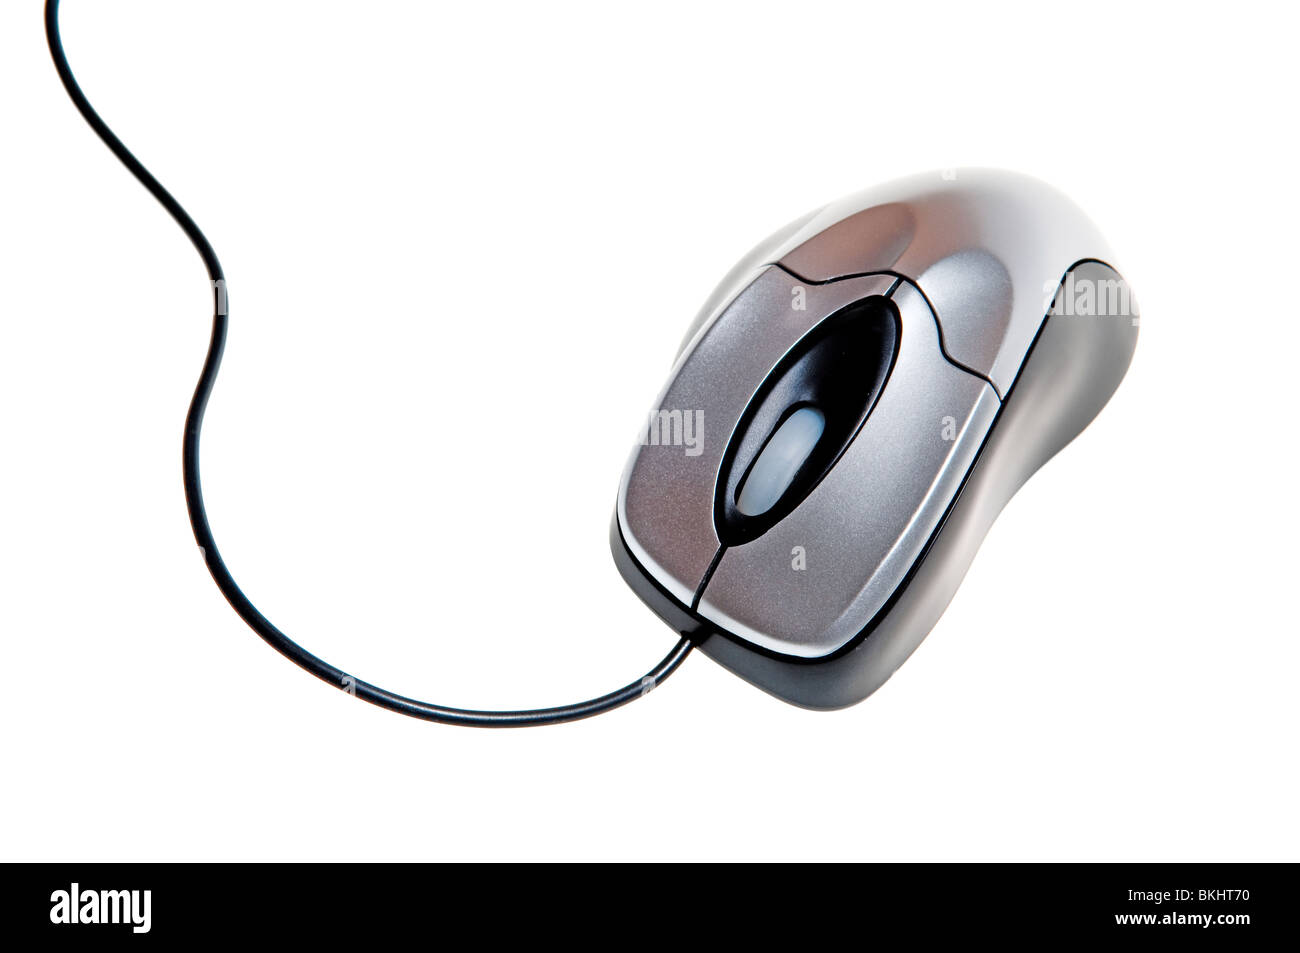 Gray computer mouse with cable on white background Stock Photo